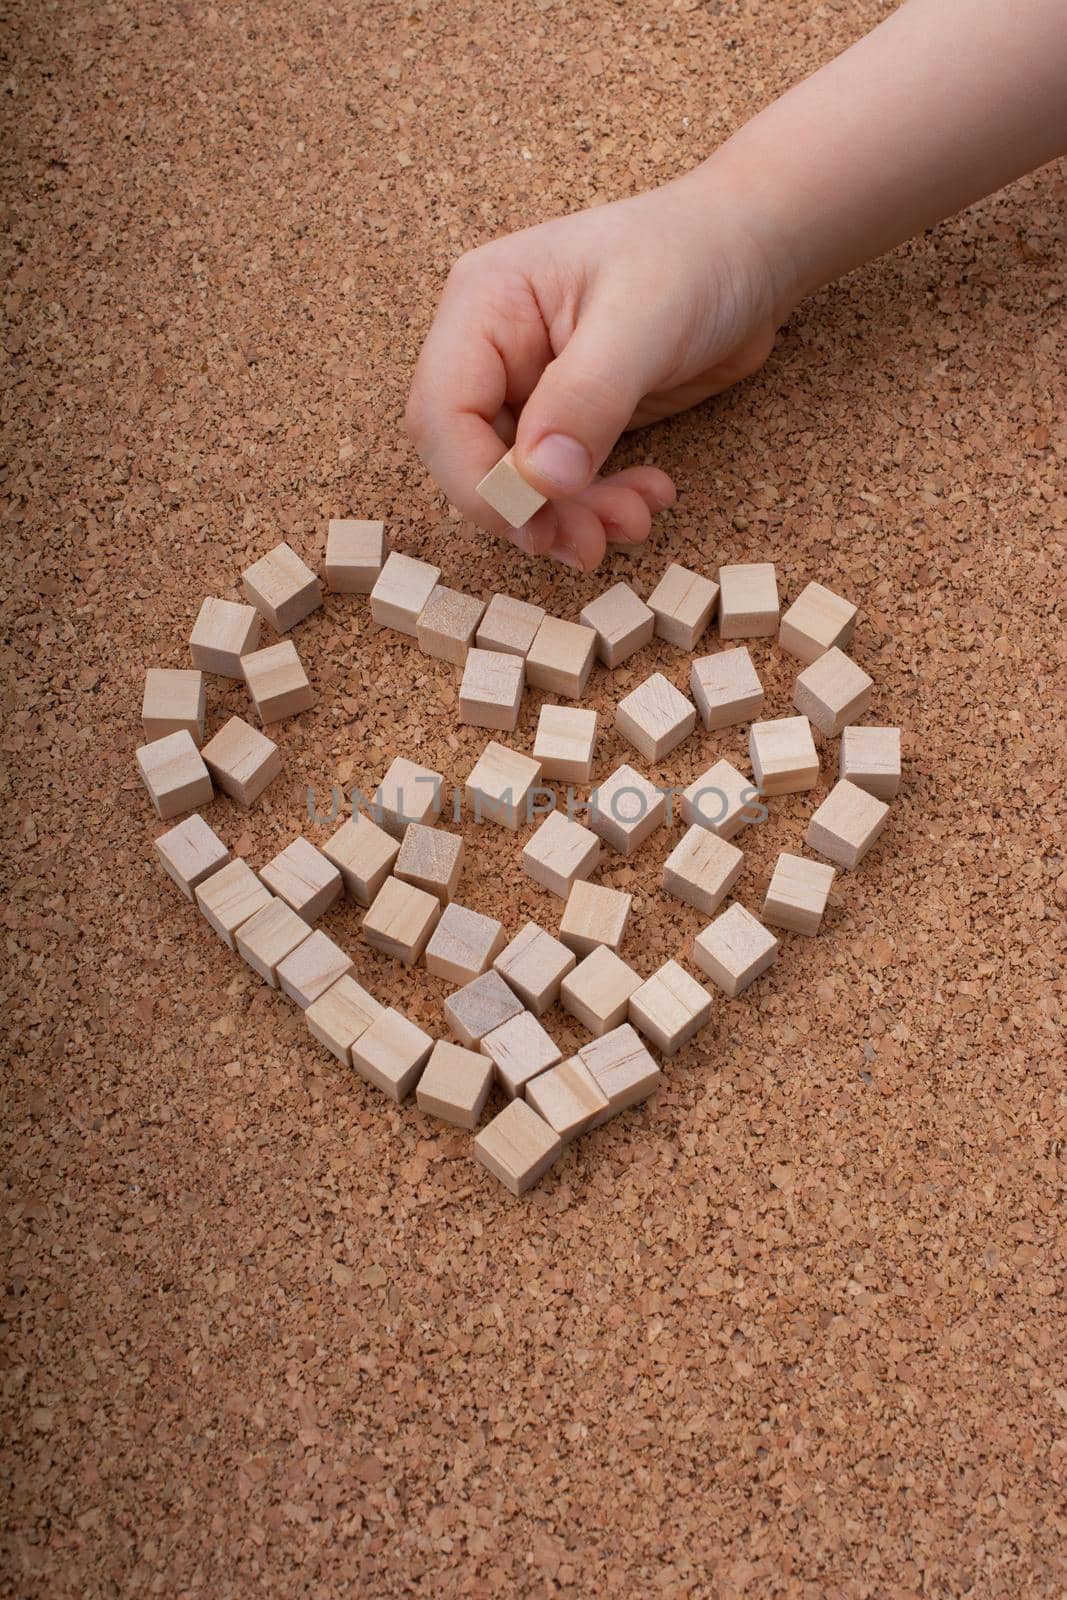 Little wooden cubes form heart shape or valentines day symbol and hand